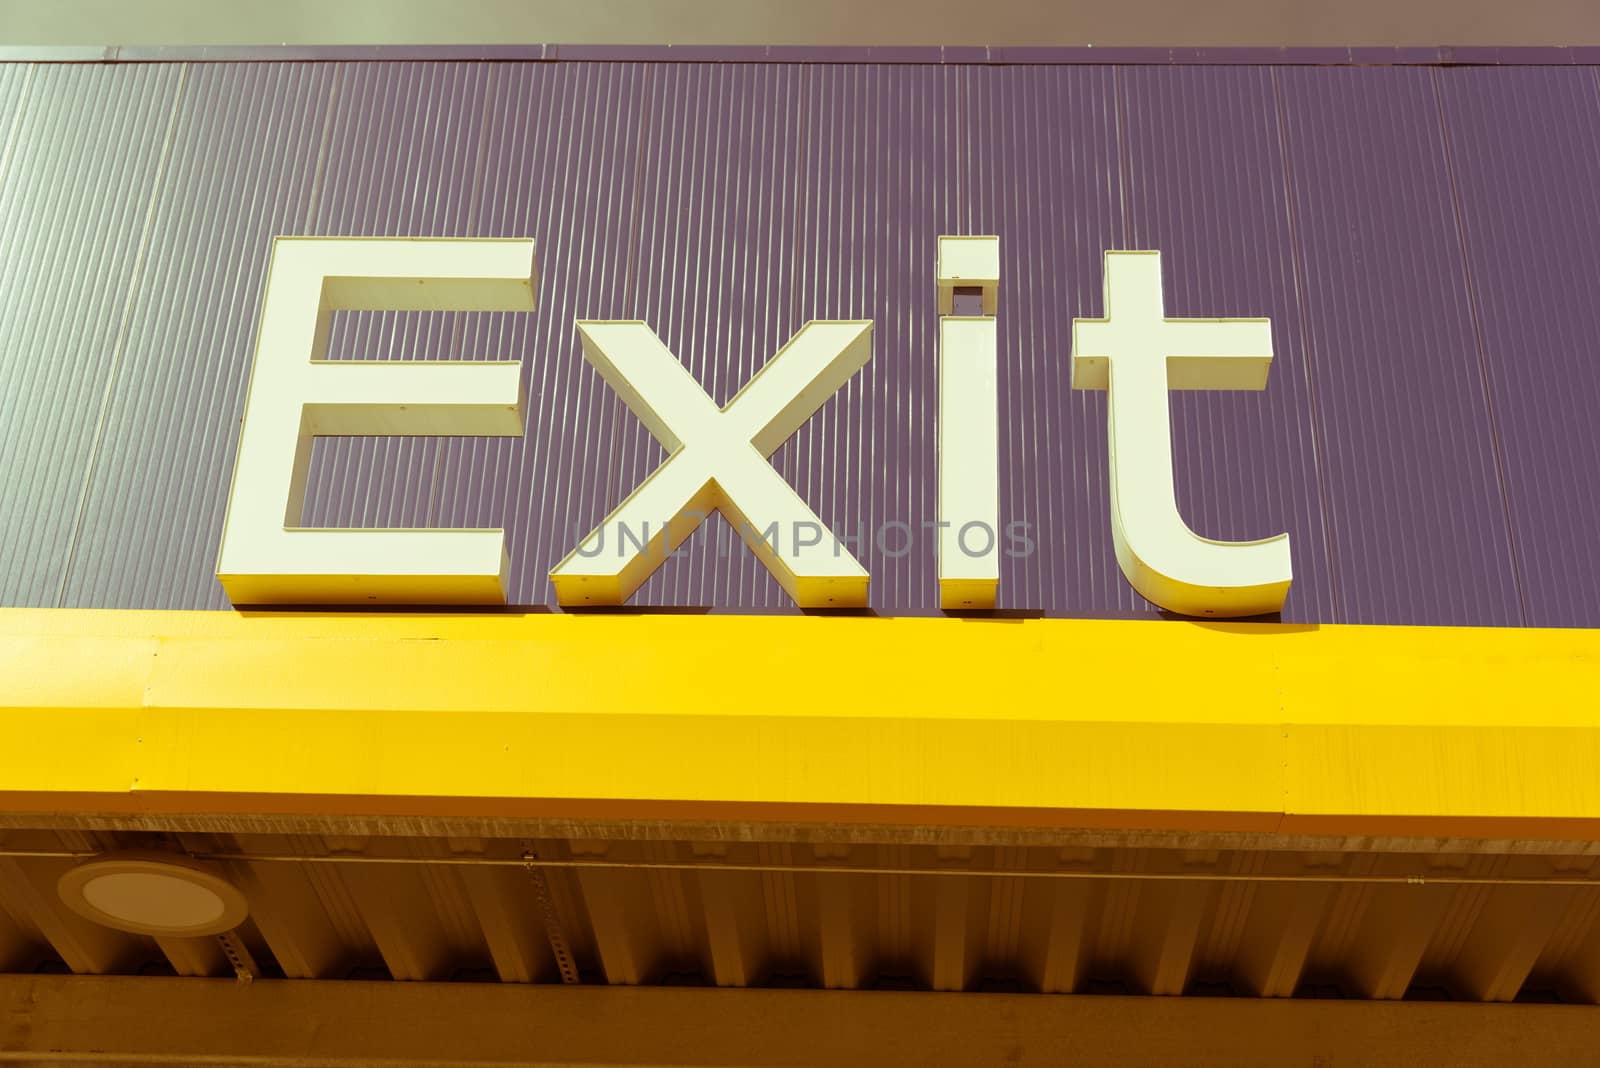 Vintage tone close-up of outdoor exit sign on building facade